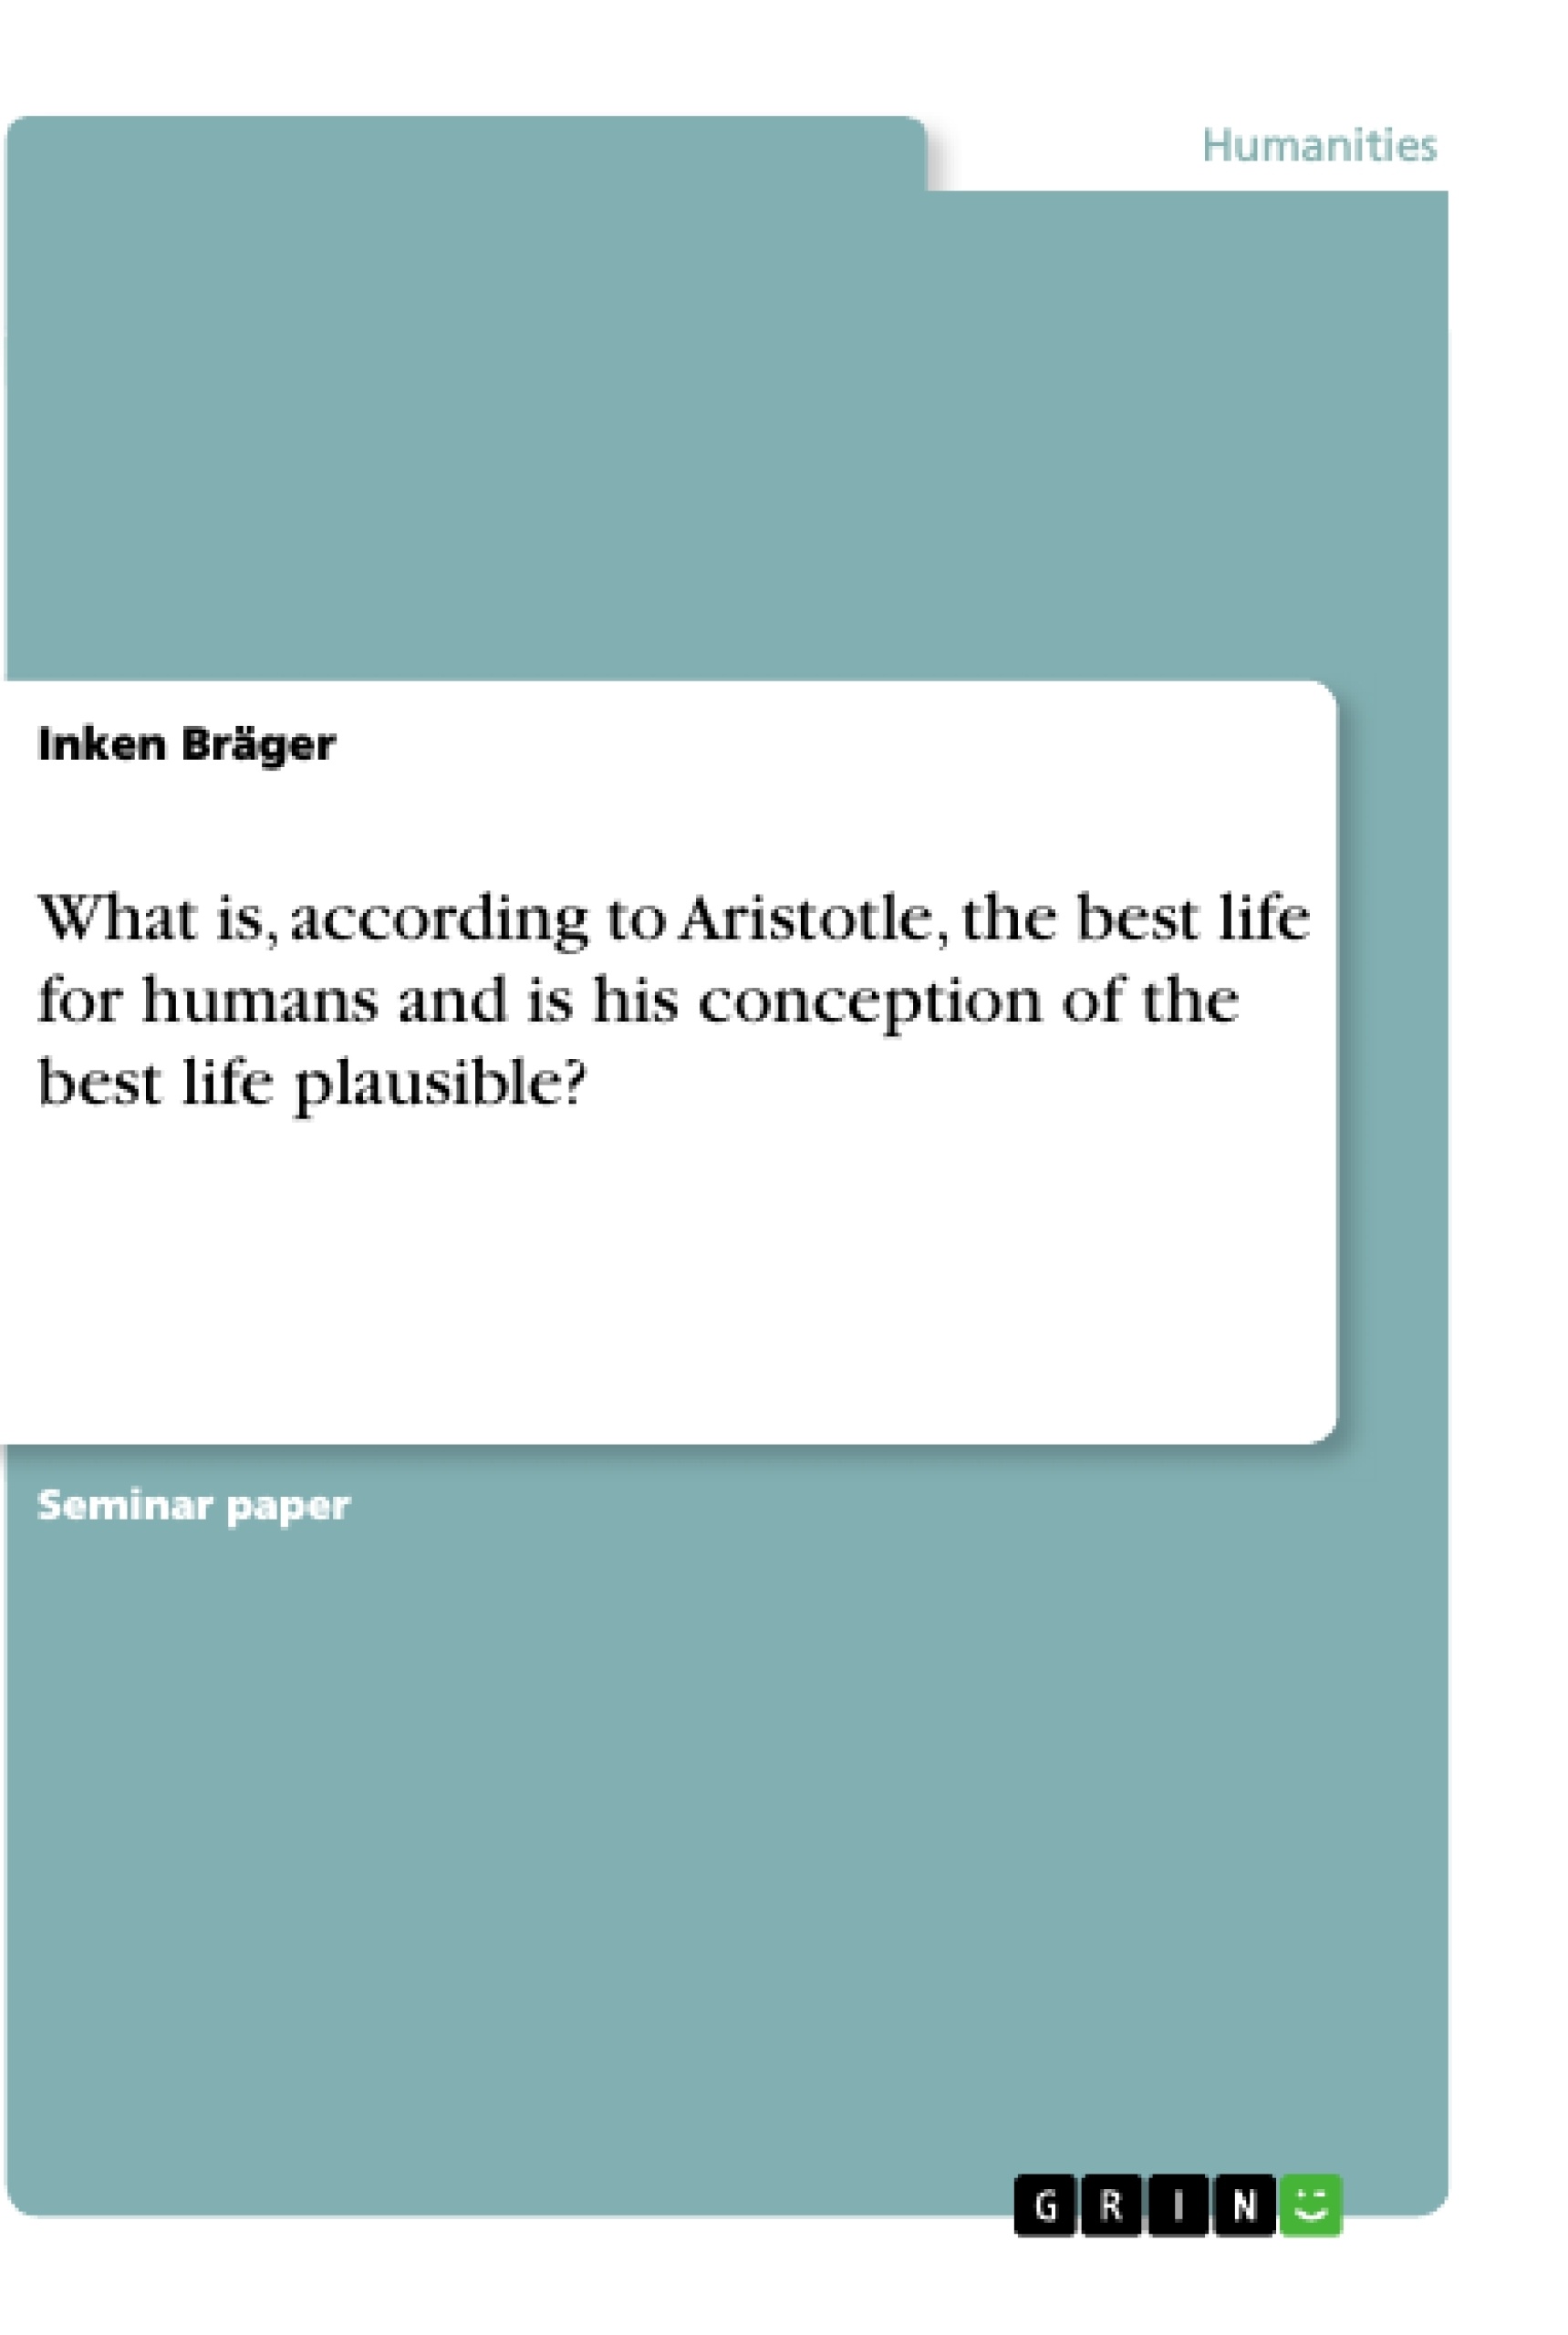 Title: What is, according to Aristotle, the best life for humans and is his conception of the best life plausible?